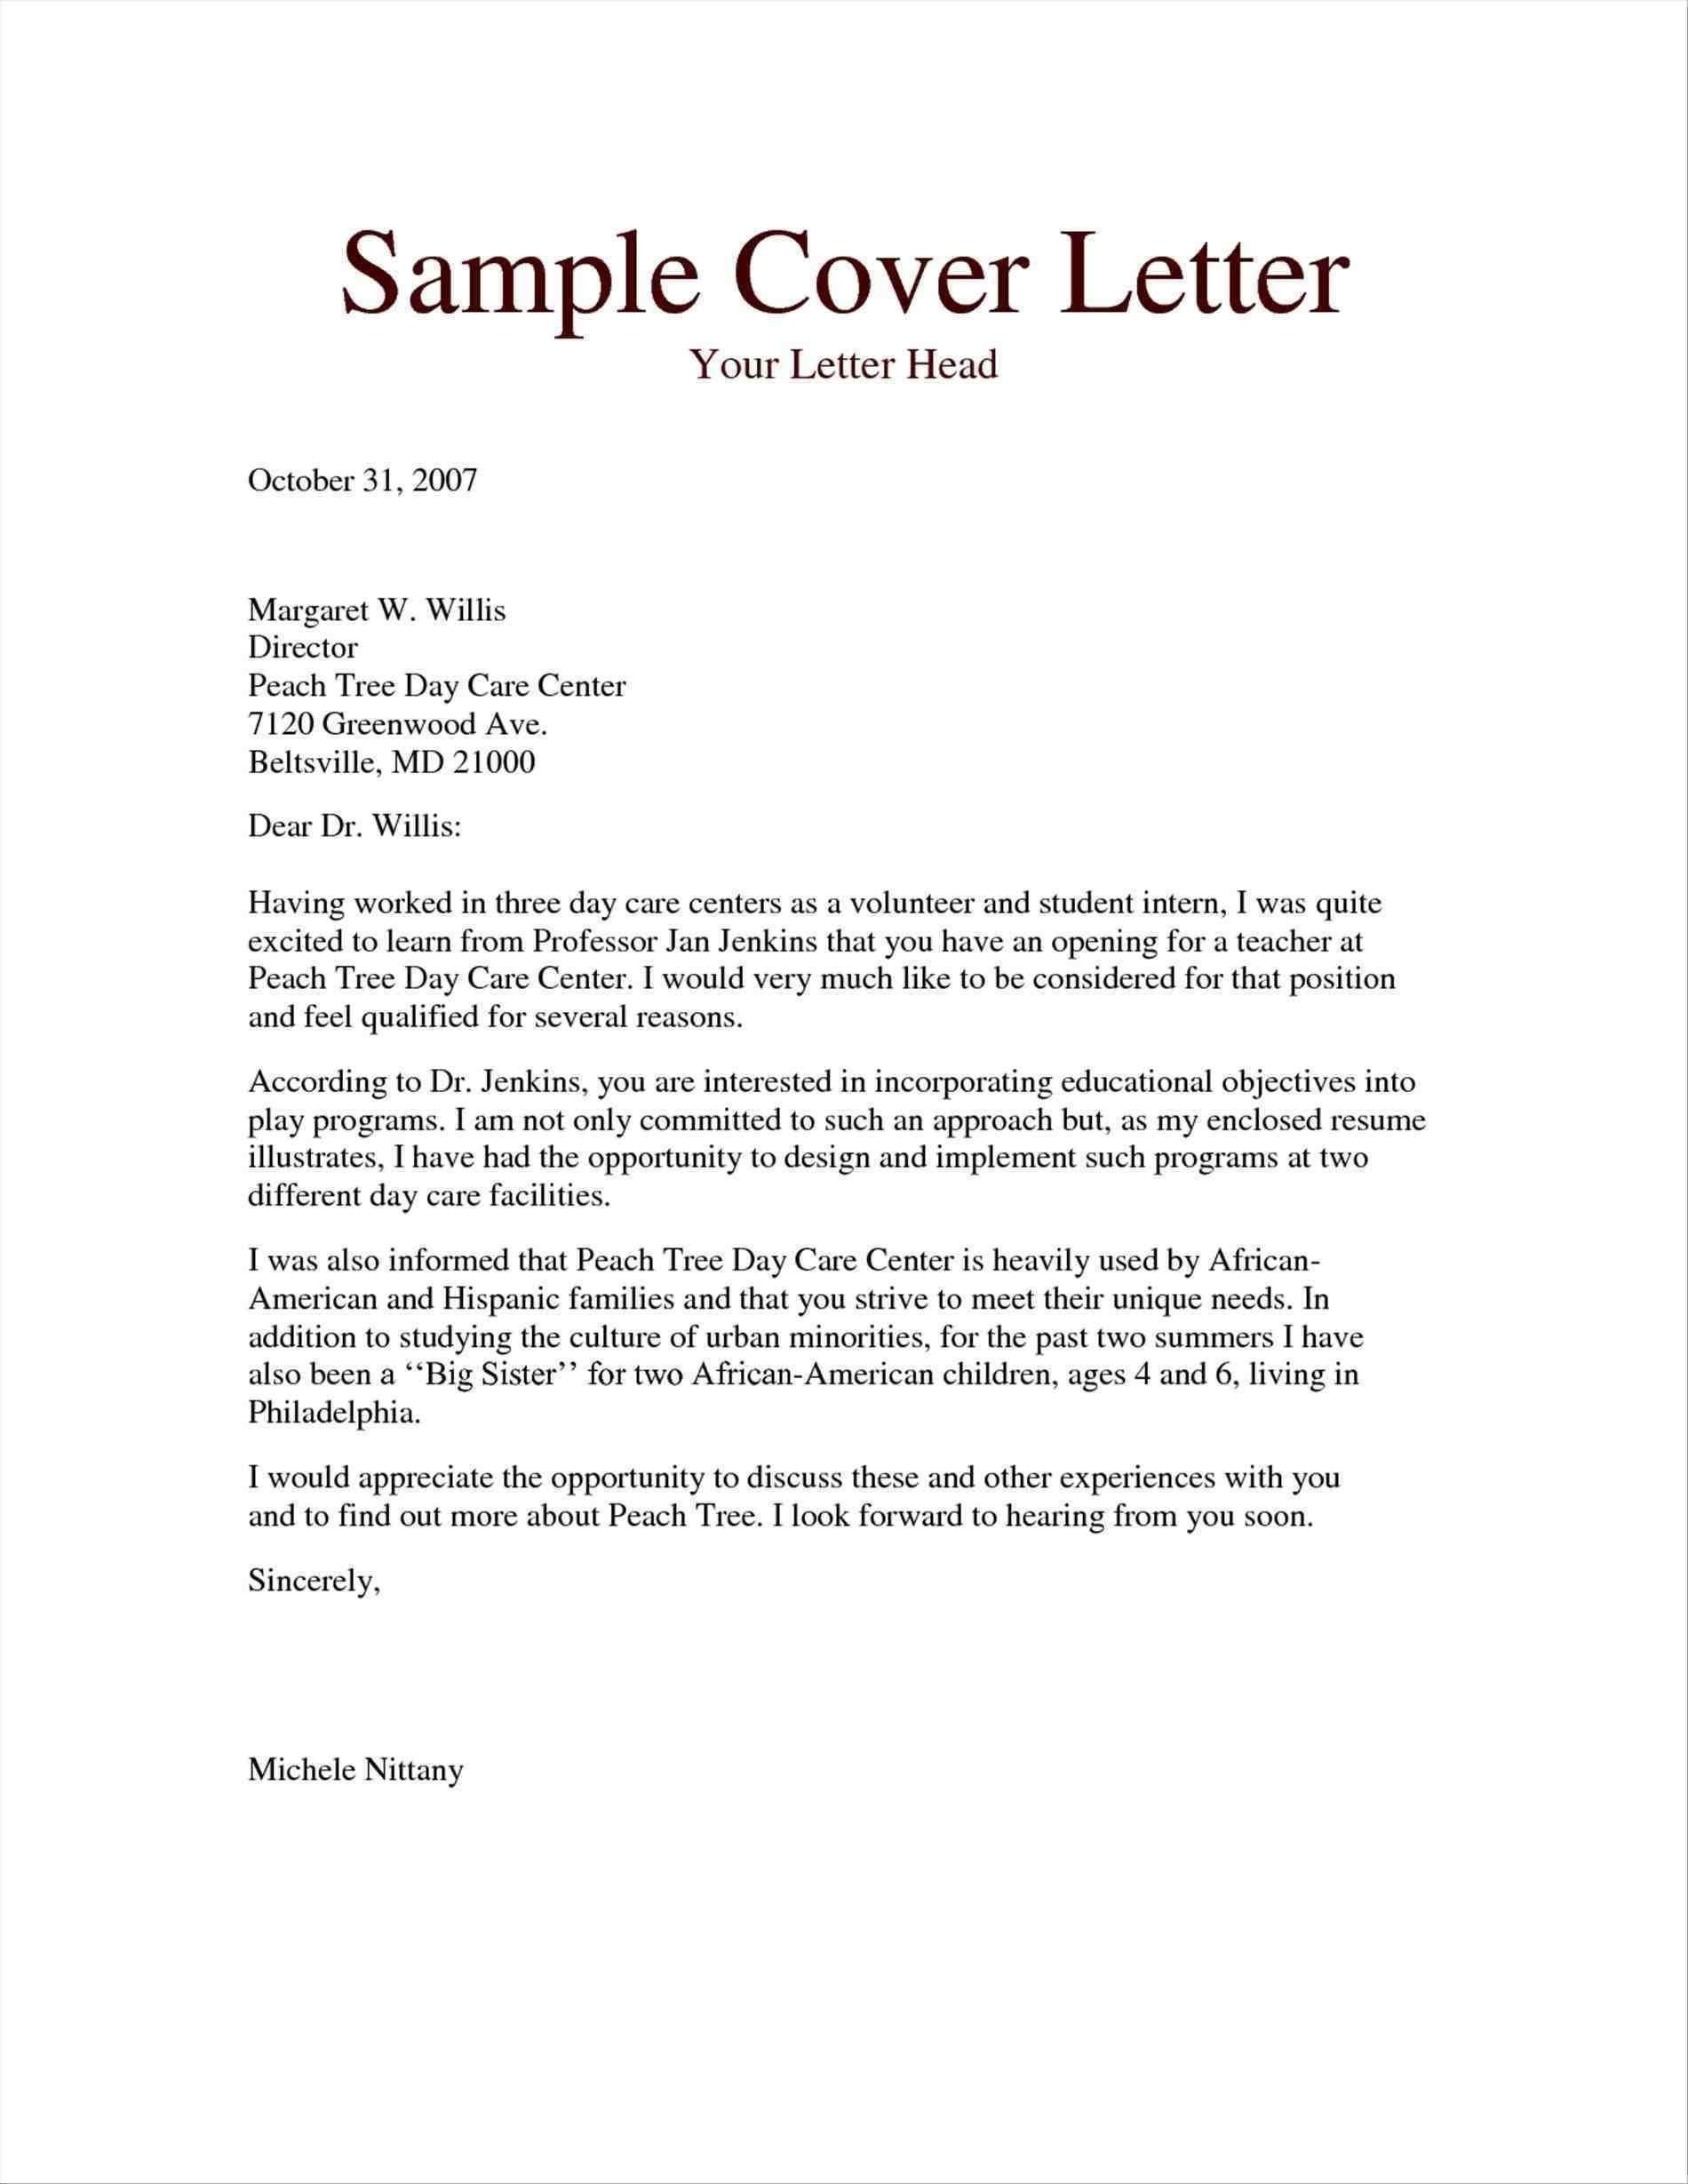 Resume Cover Letter Samples with No Experience Cover Letter No Experience but Willing to Learn â Cover Letter …